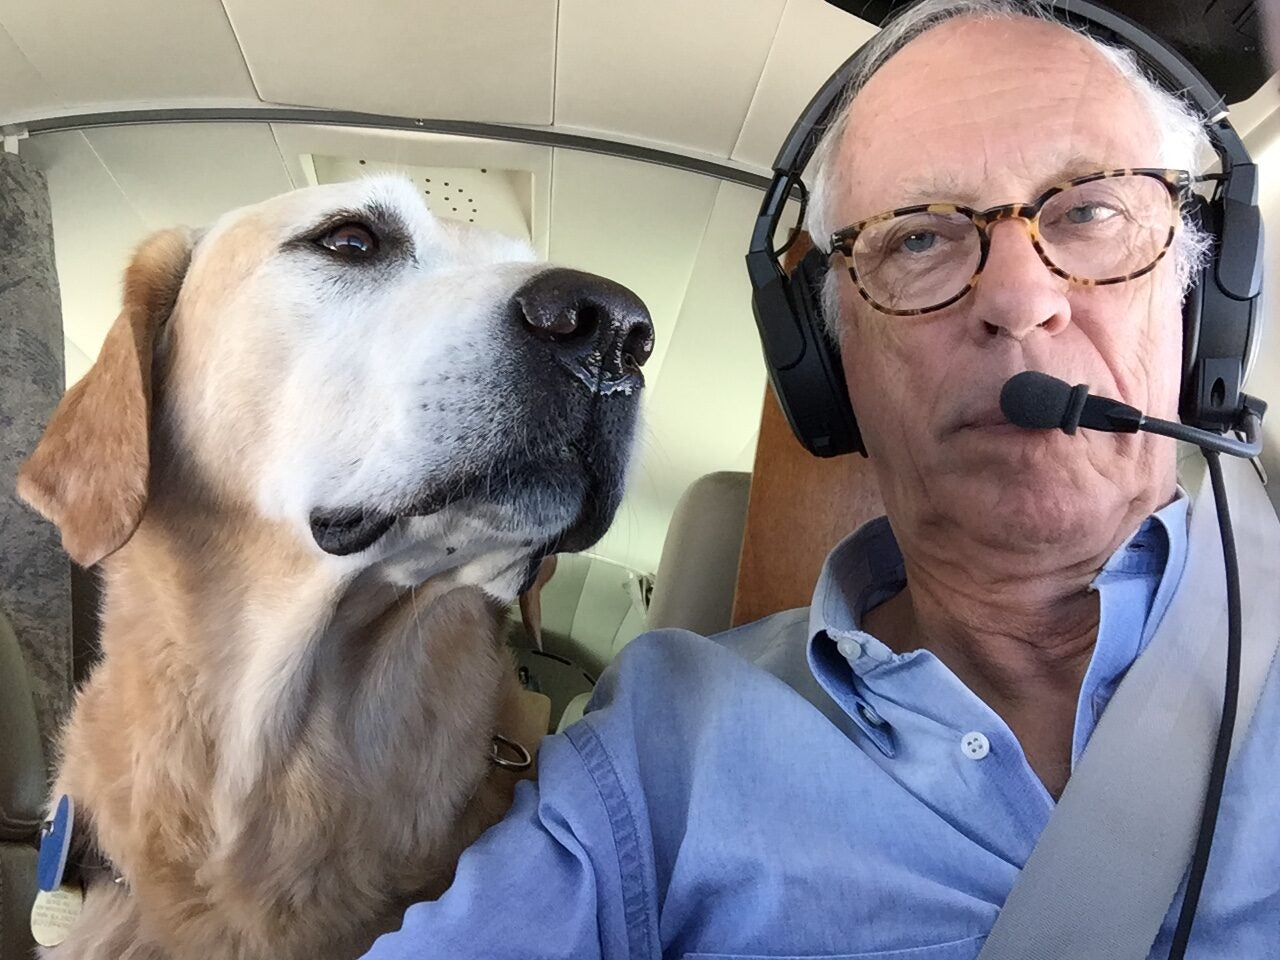 Rescue Dogs and Airplanes